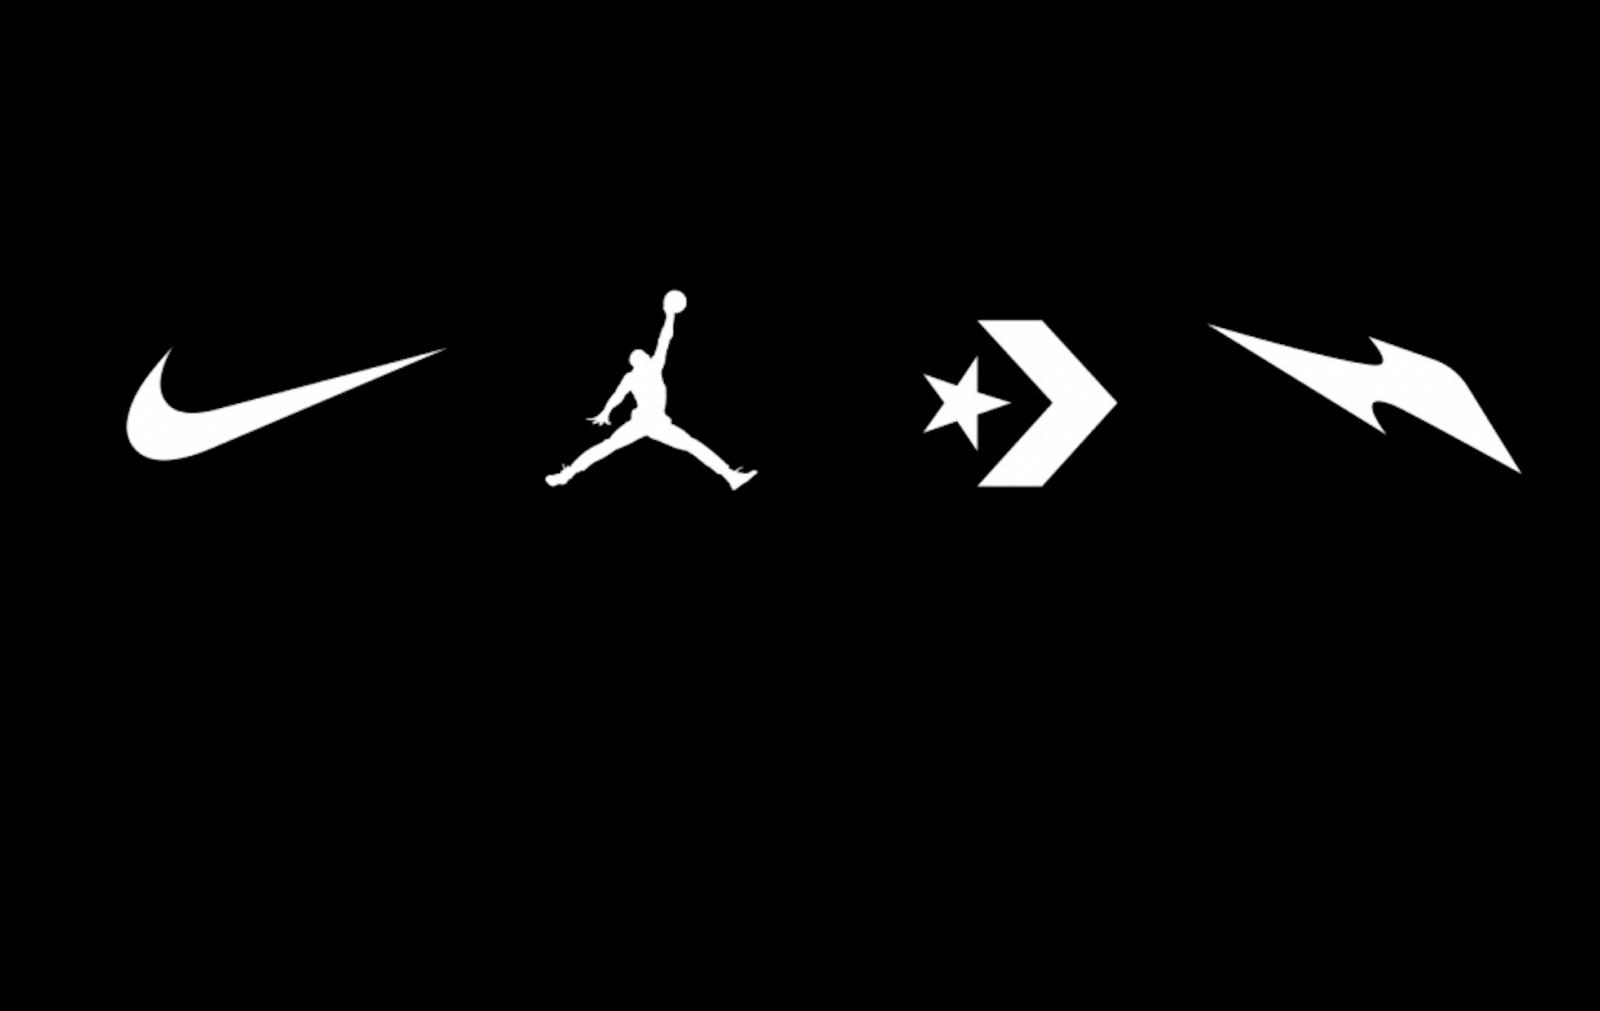 New Nike Trademark Filings Drop Light on its Latest Moves in the Metaverse